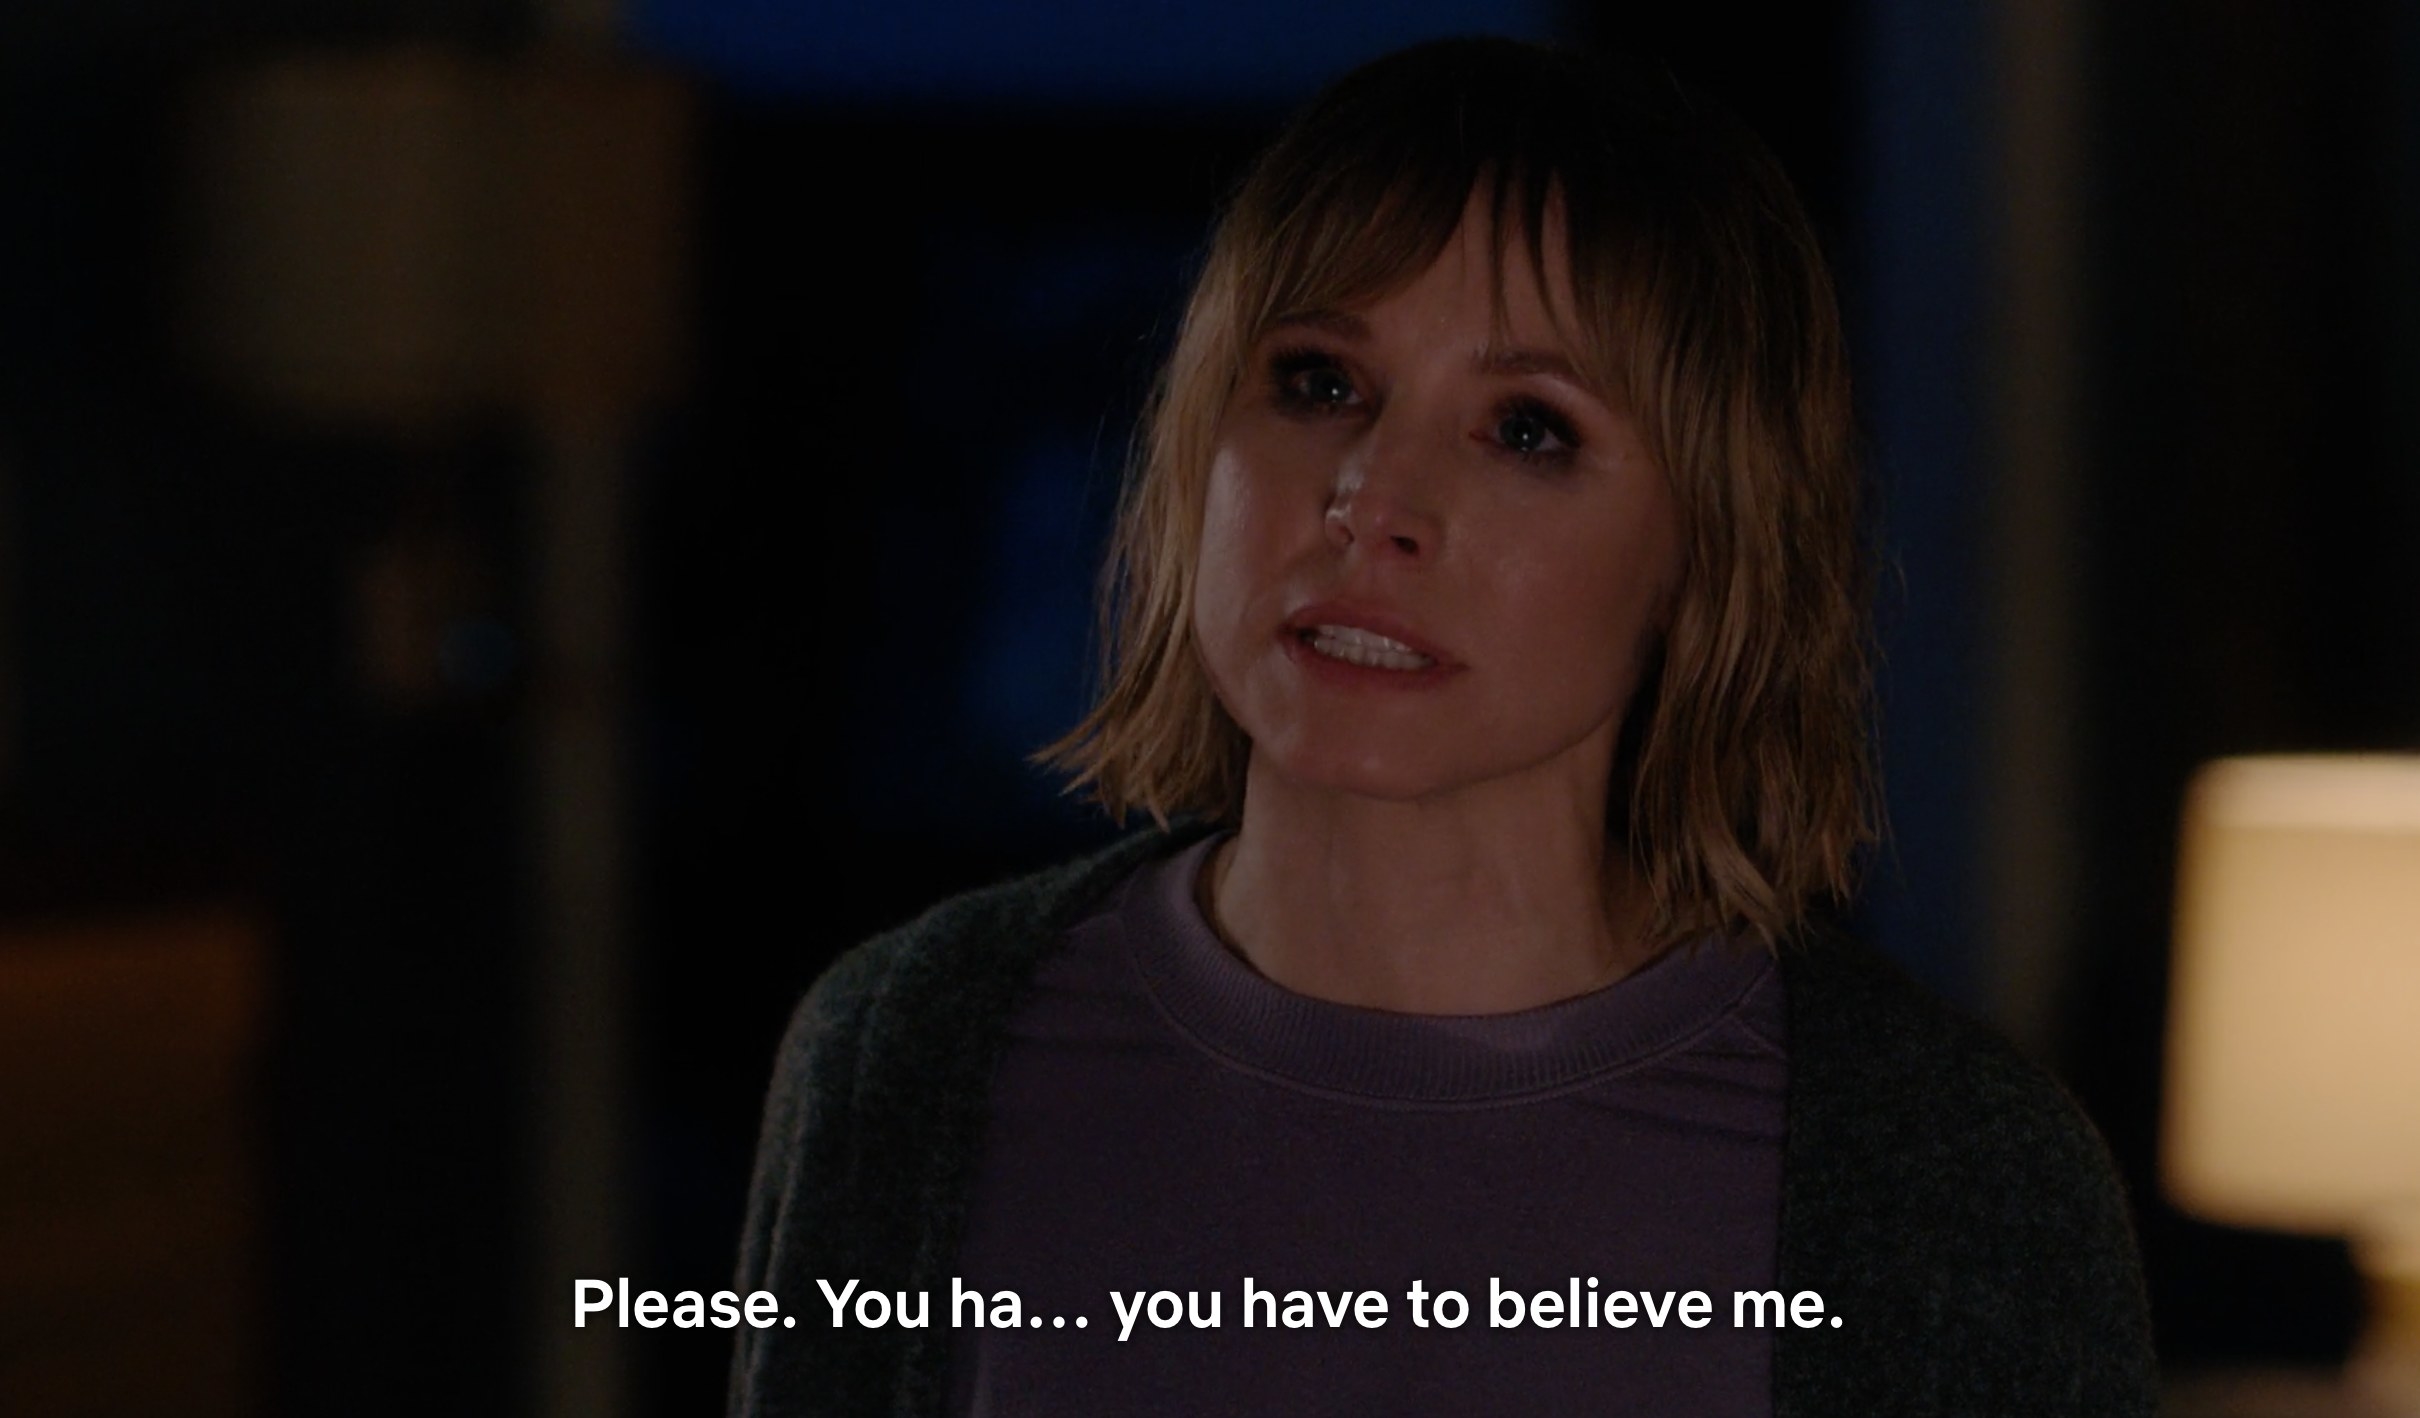 A drenched Kristen Bell asking a detective to please believe her report of witnessing a murder